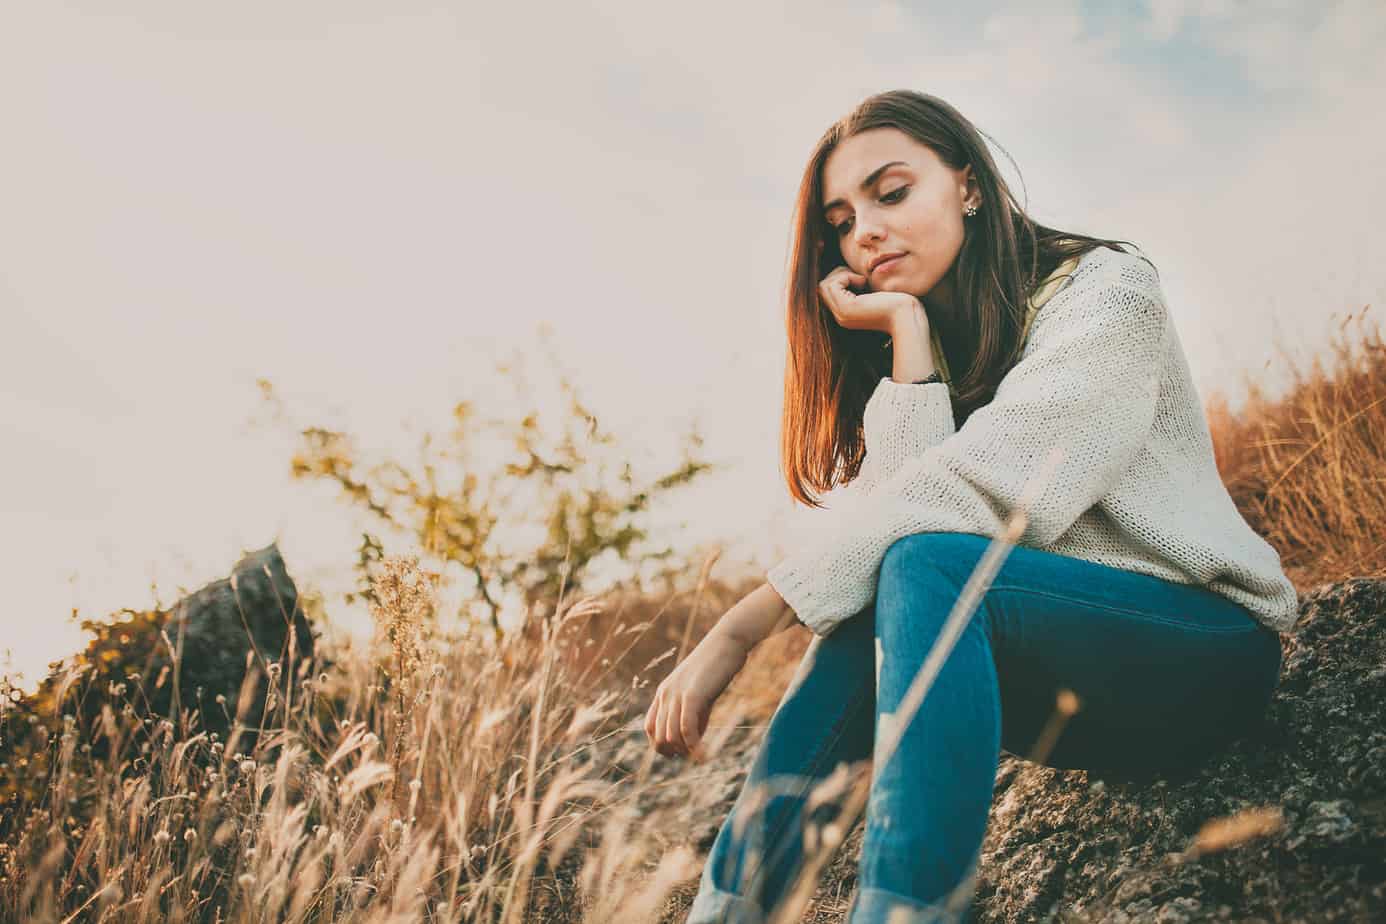 A girl sits alone outdoors while wearing a sweater.